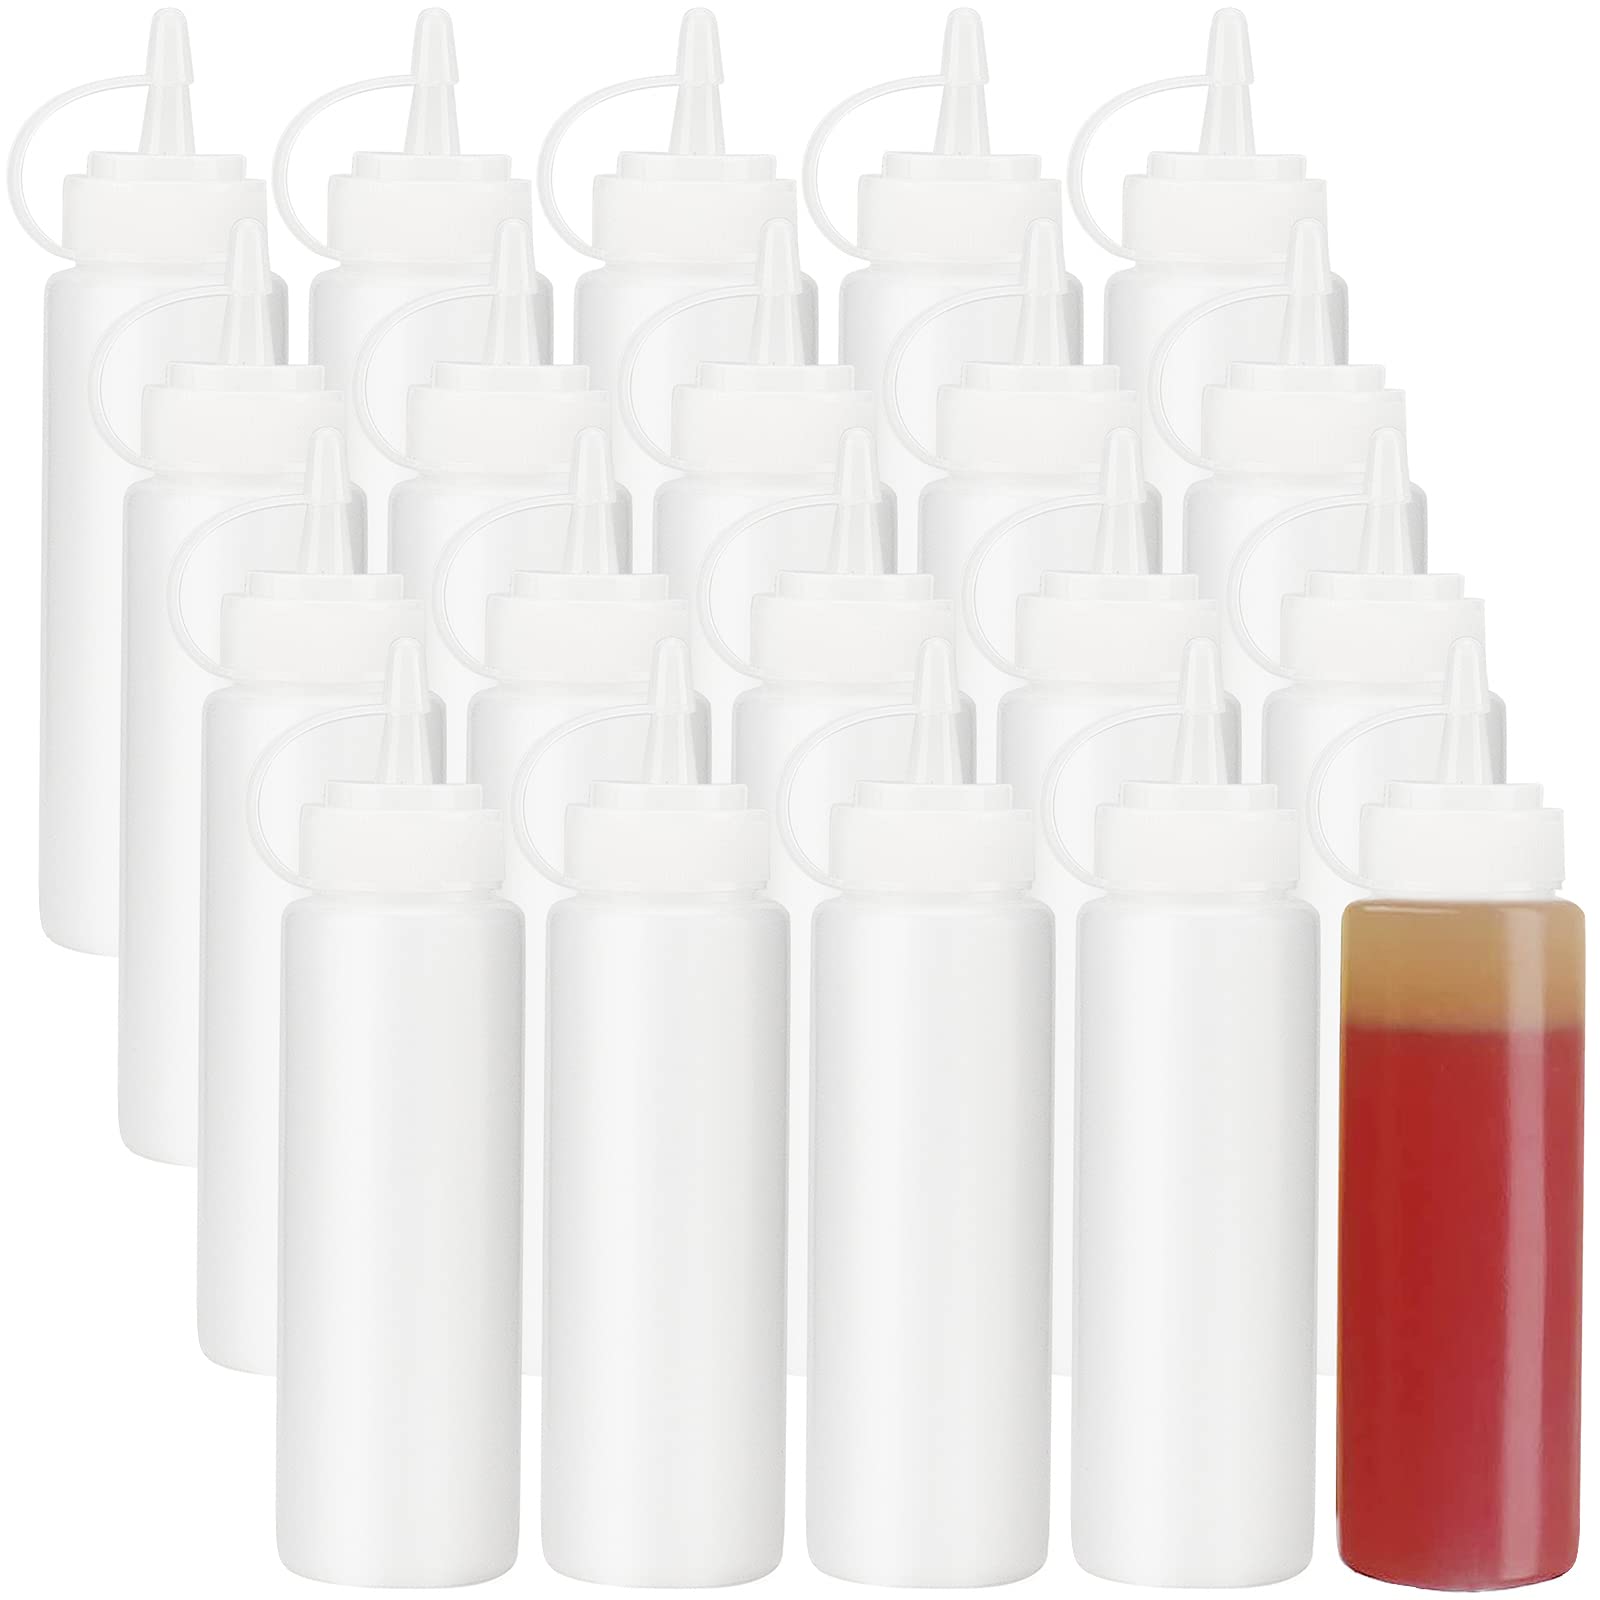 HEIHAK 20 Pack 8 oz Ketchup Squeeze Bottles, 250ml Plastic Condiment Bottles, Barbecue Squirt Bottles with Caps and Marking Labels for Ketchup, Sauces, Dressings, Paints, Crafts, White